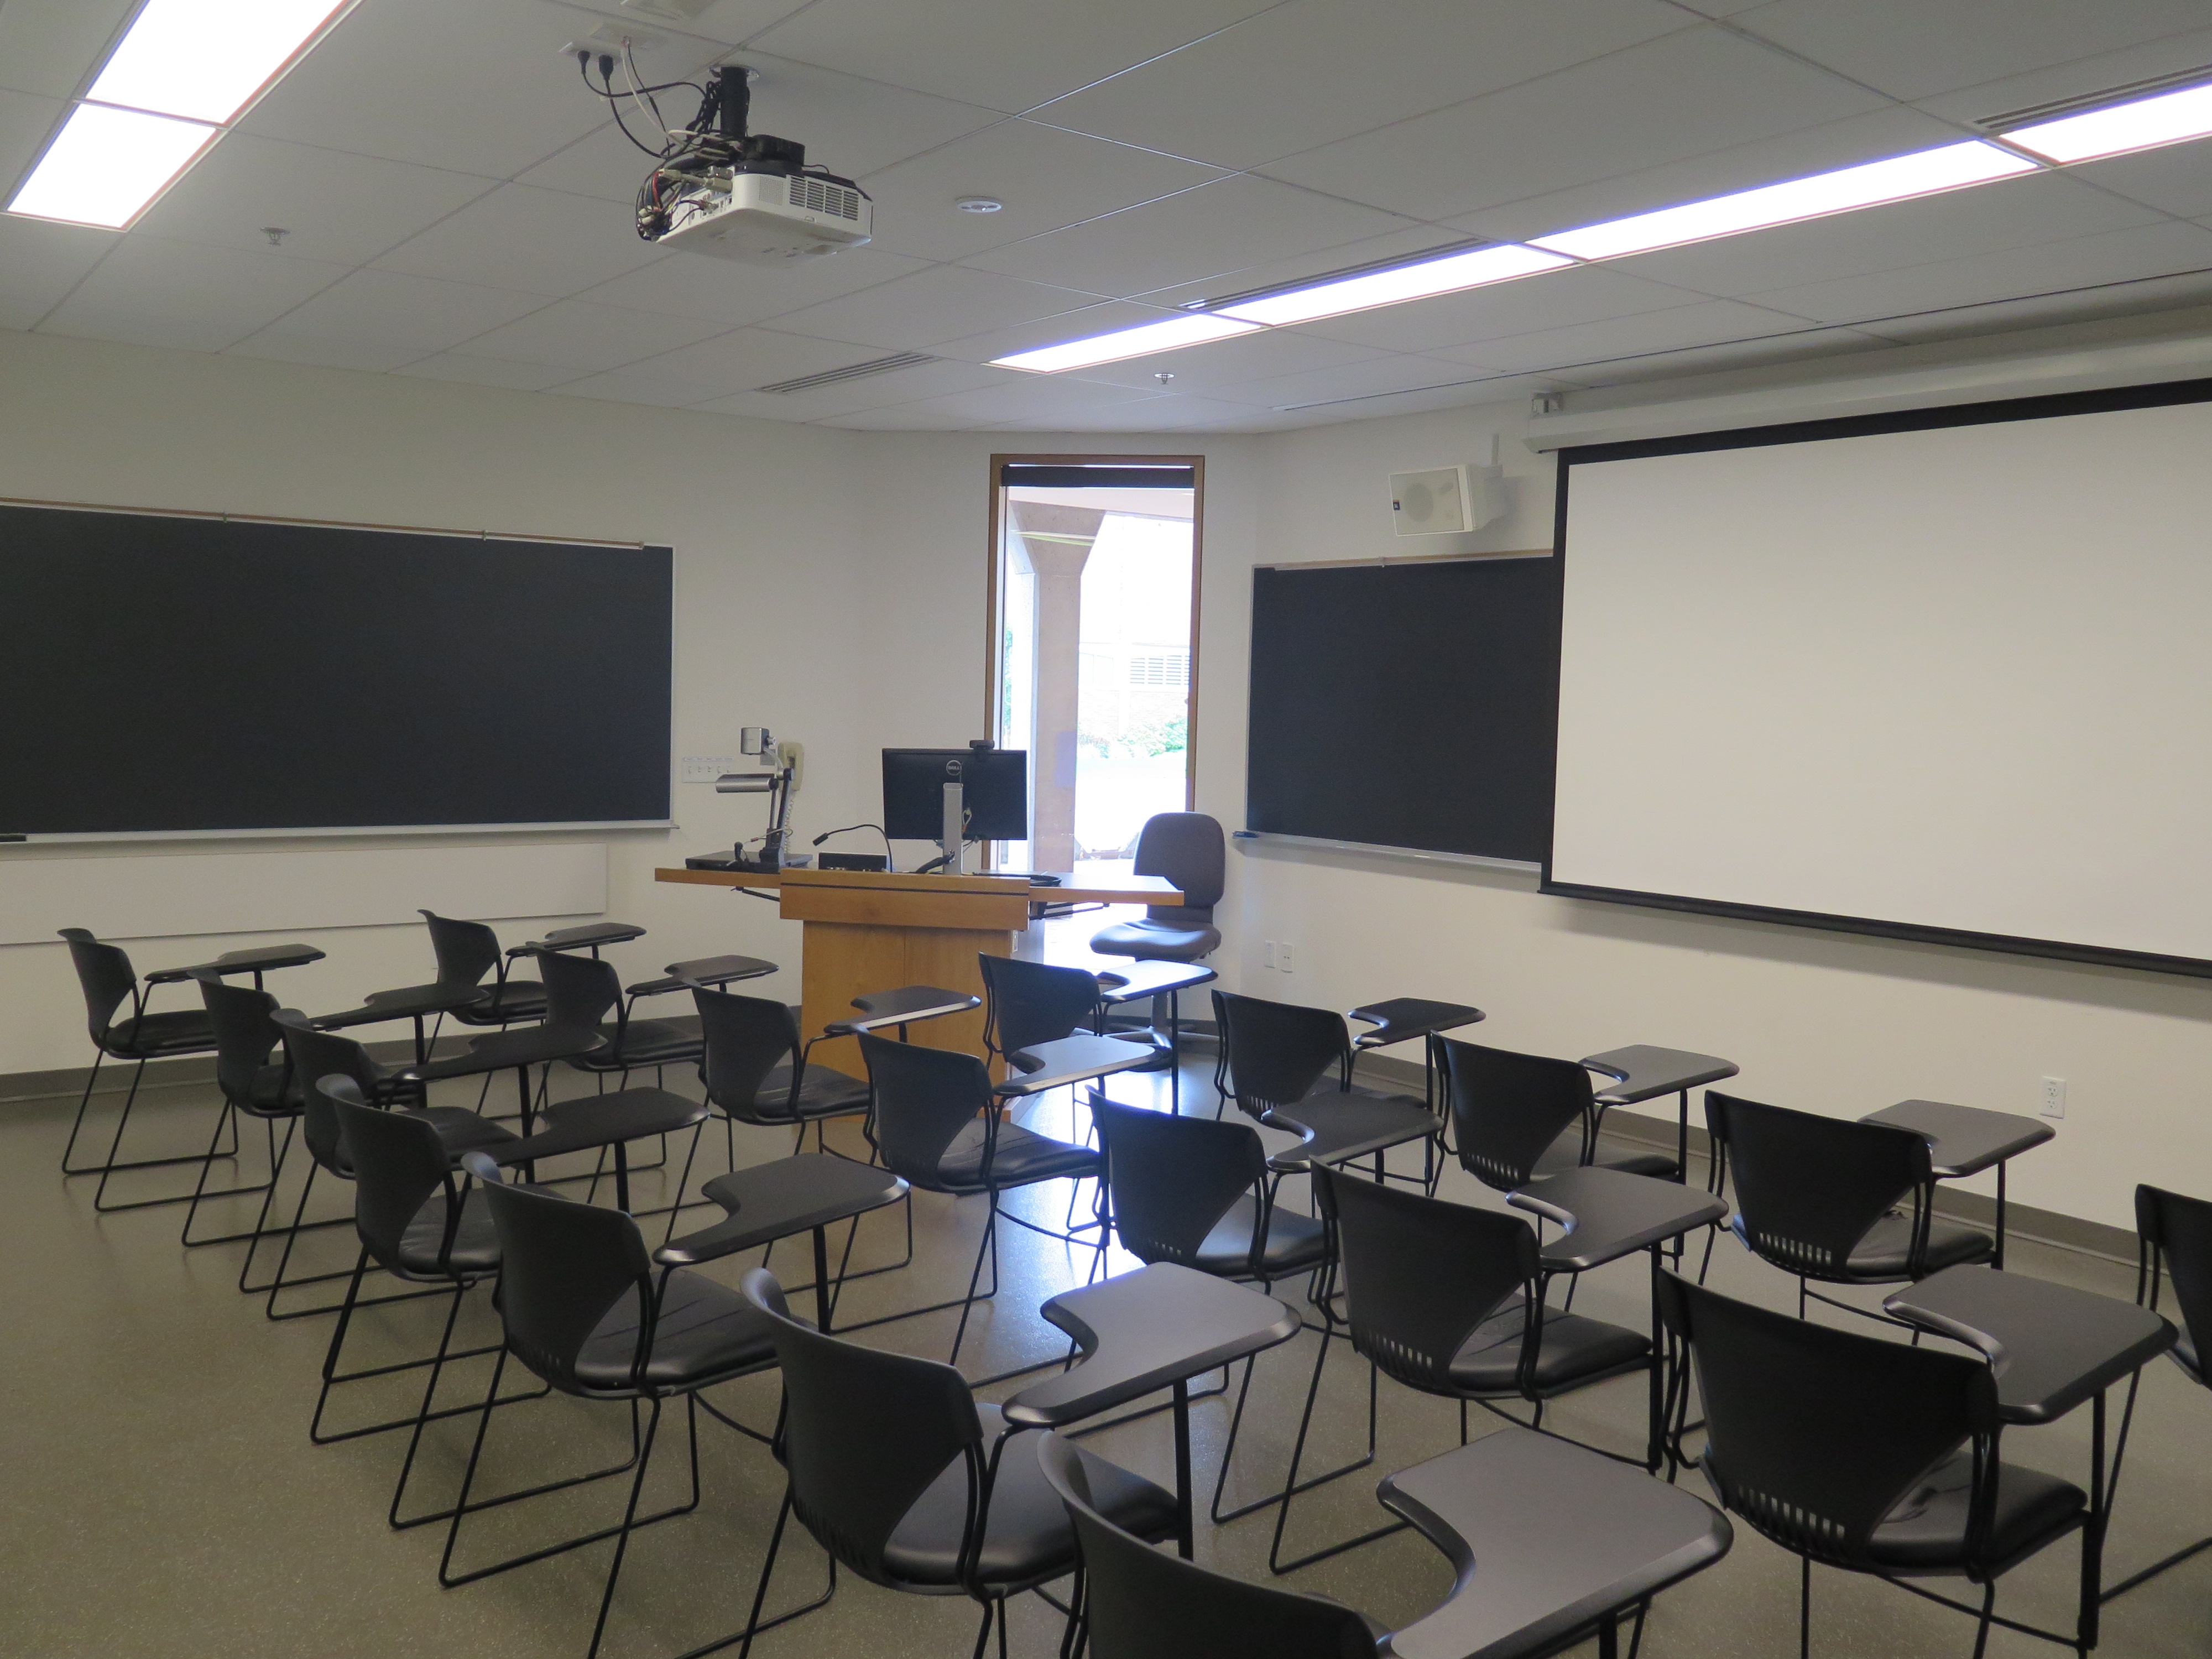 Room Consists of hard floors, moveable tablet armchairs, a white board and podium are both located at the front of the room and chalkboards are located on the outer right and left walls of the room.